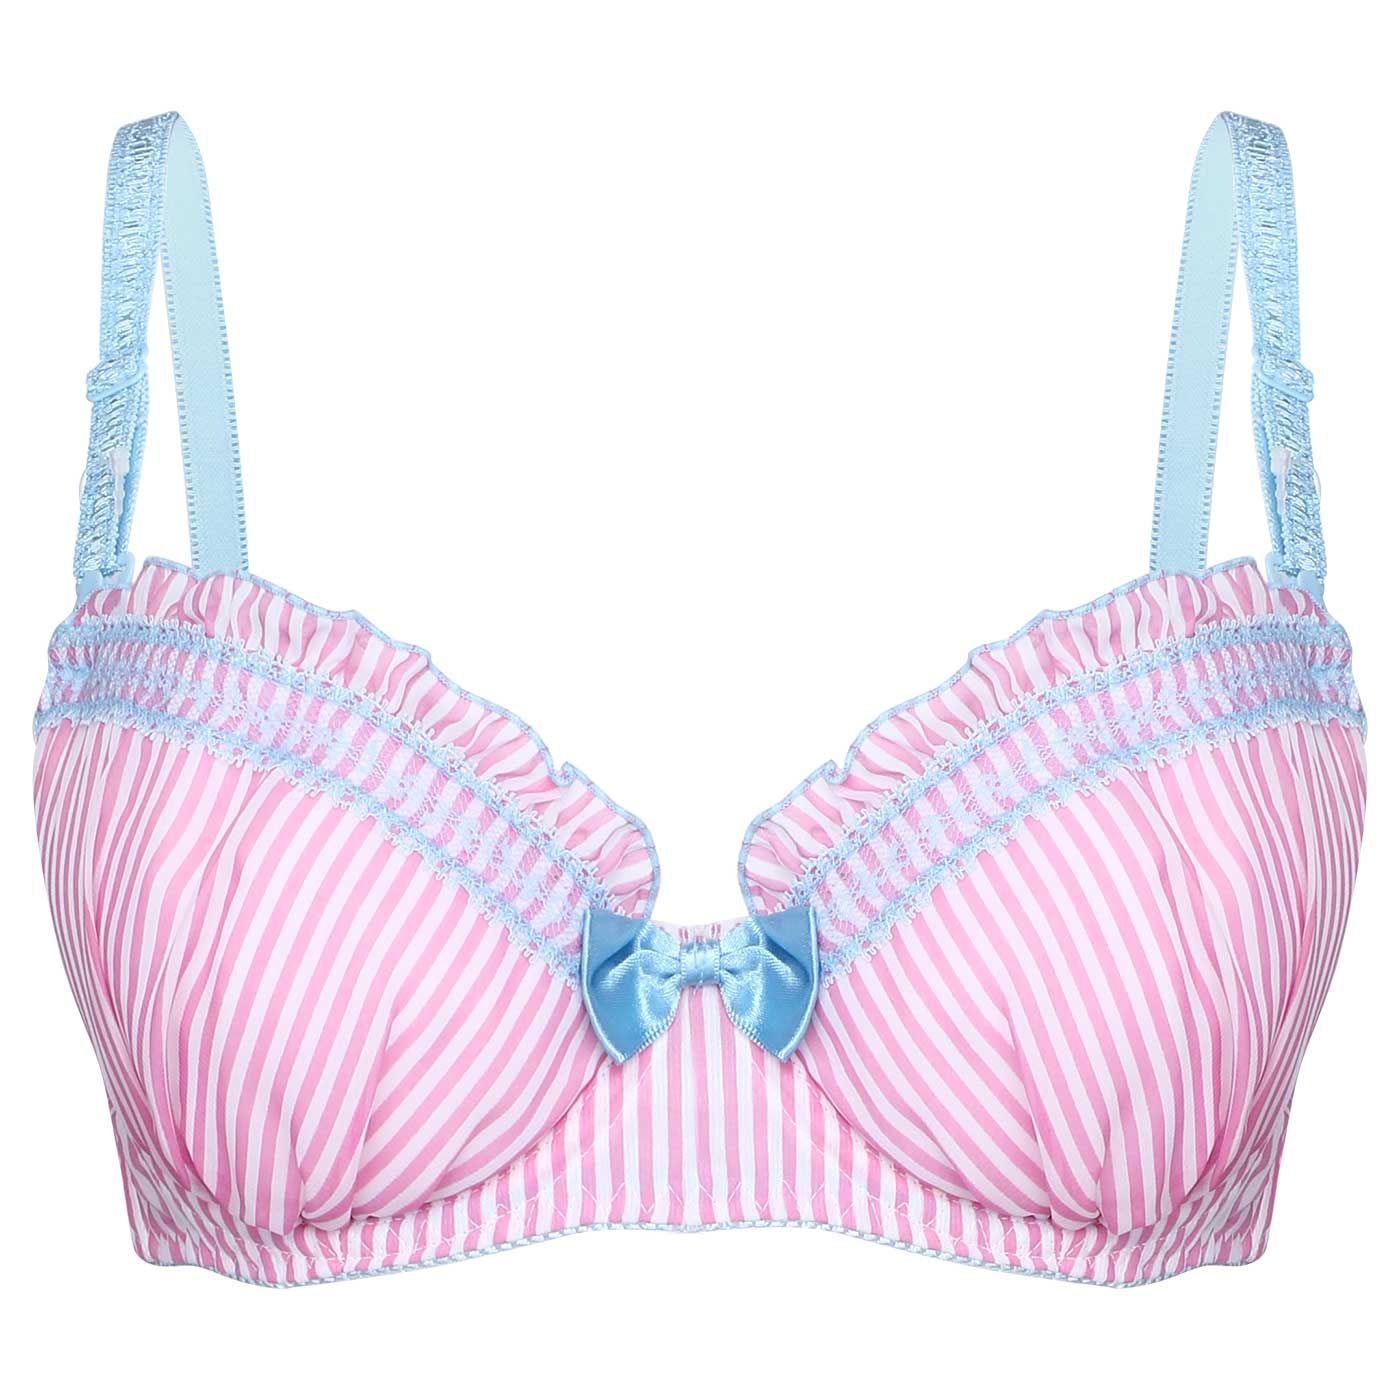 Rosemadame Special Brassiere Shell Stripe Pink-C80 - 1